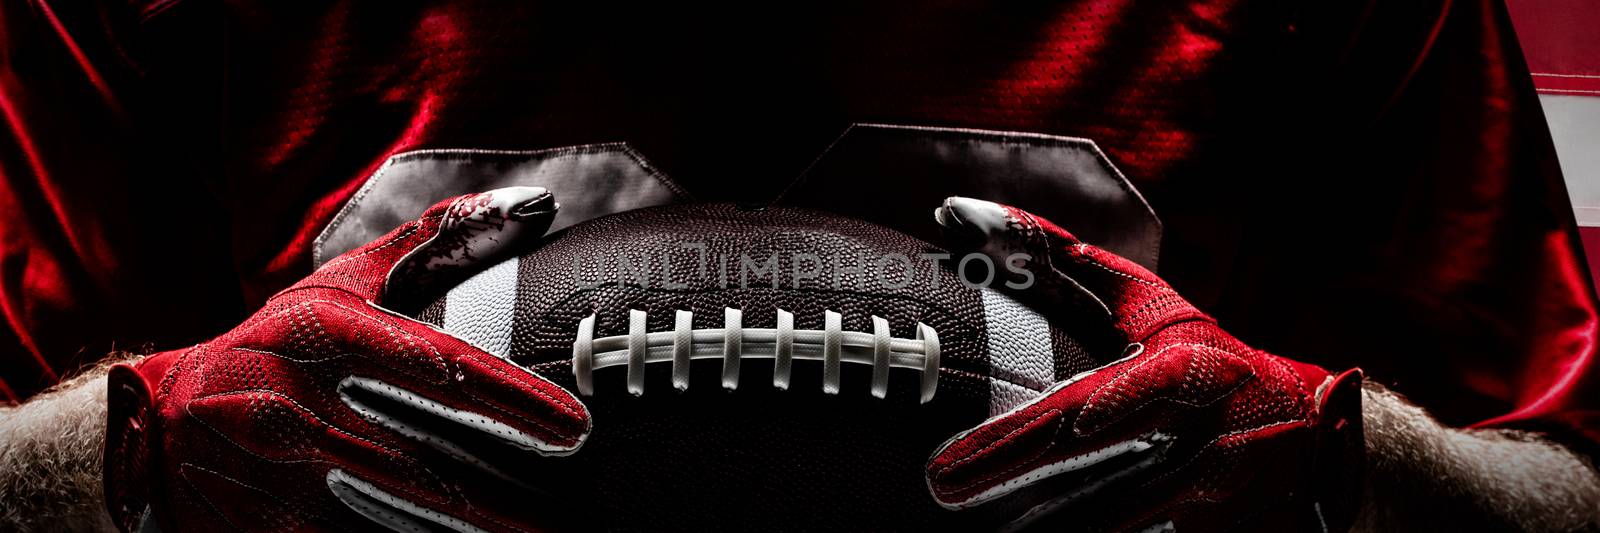 American football player standing with rugby helmet and ball against close-up of an american flag